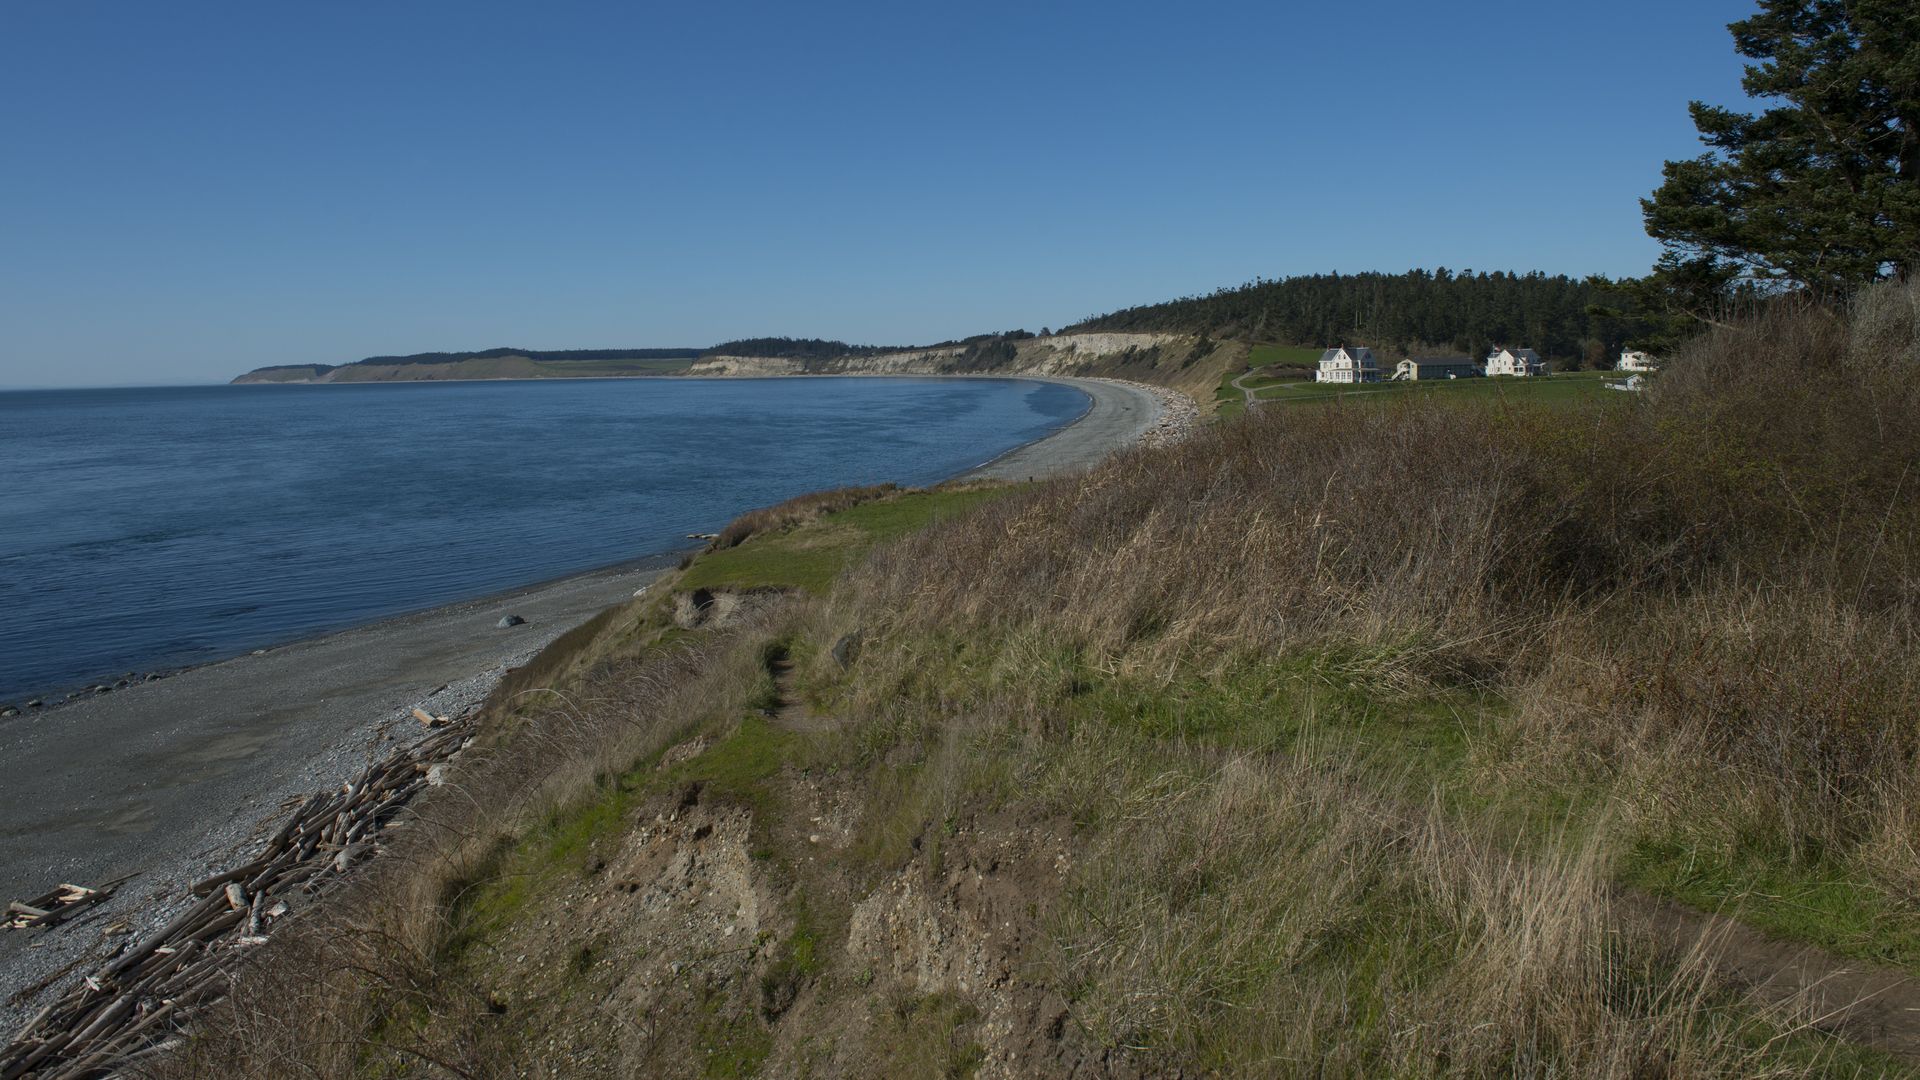 Beach at Fort Casey State Park on Whidbey Island, Washington State.